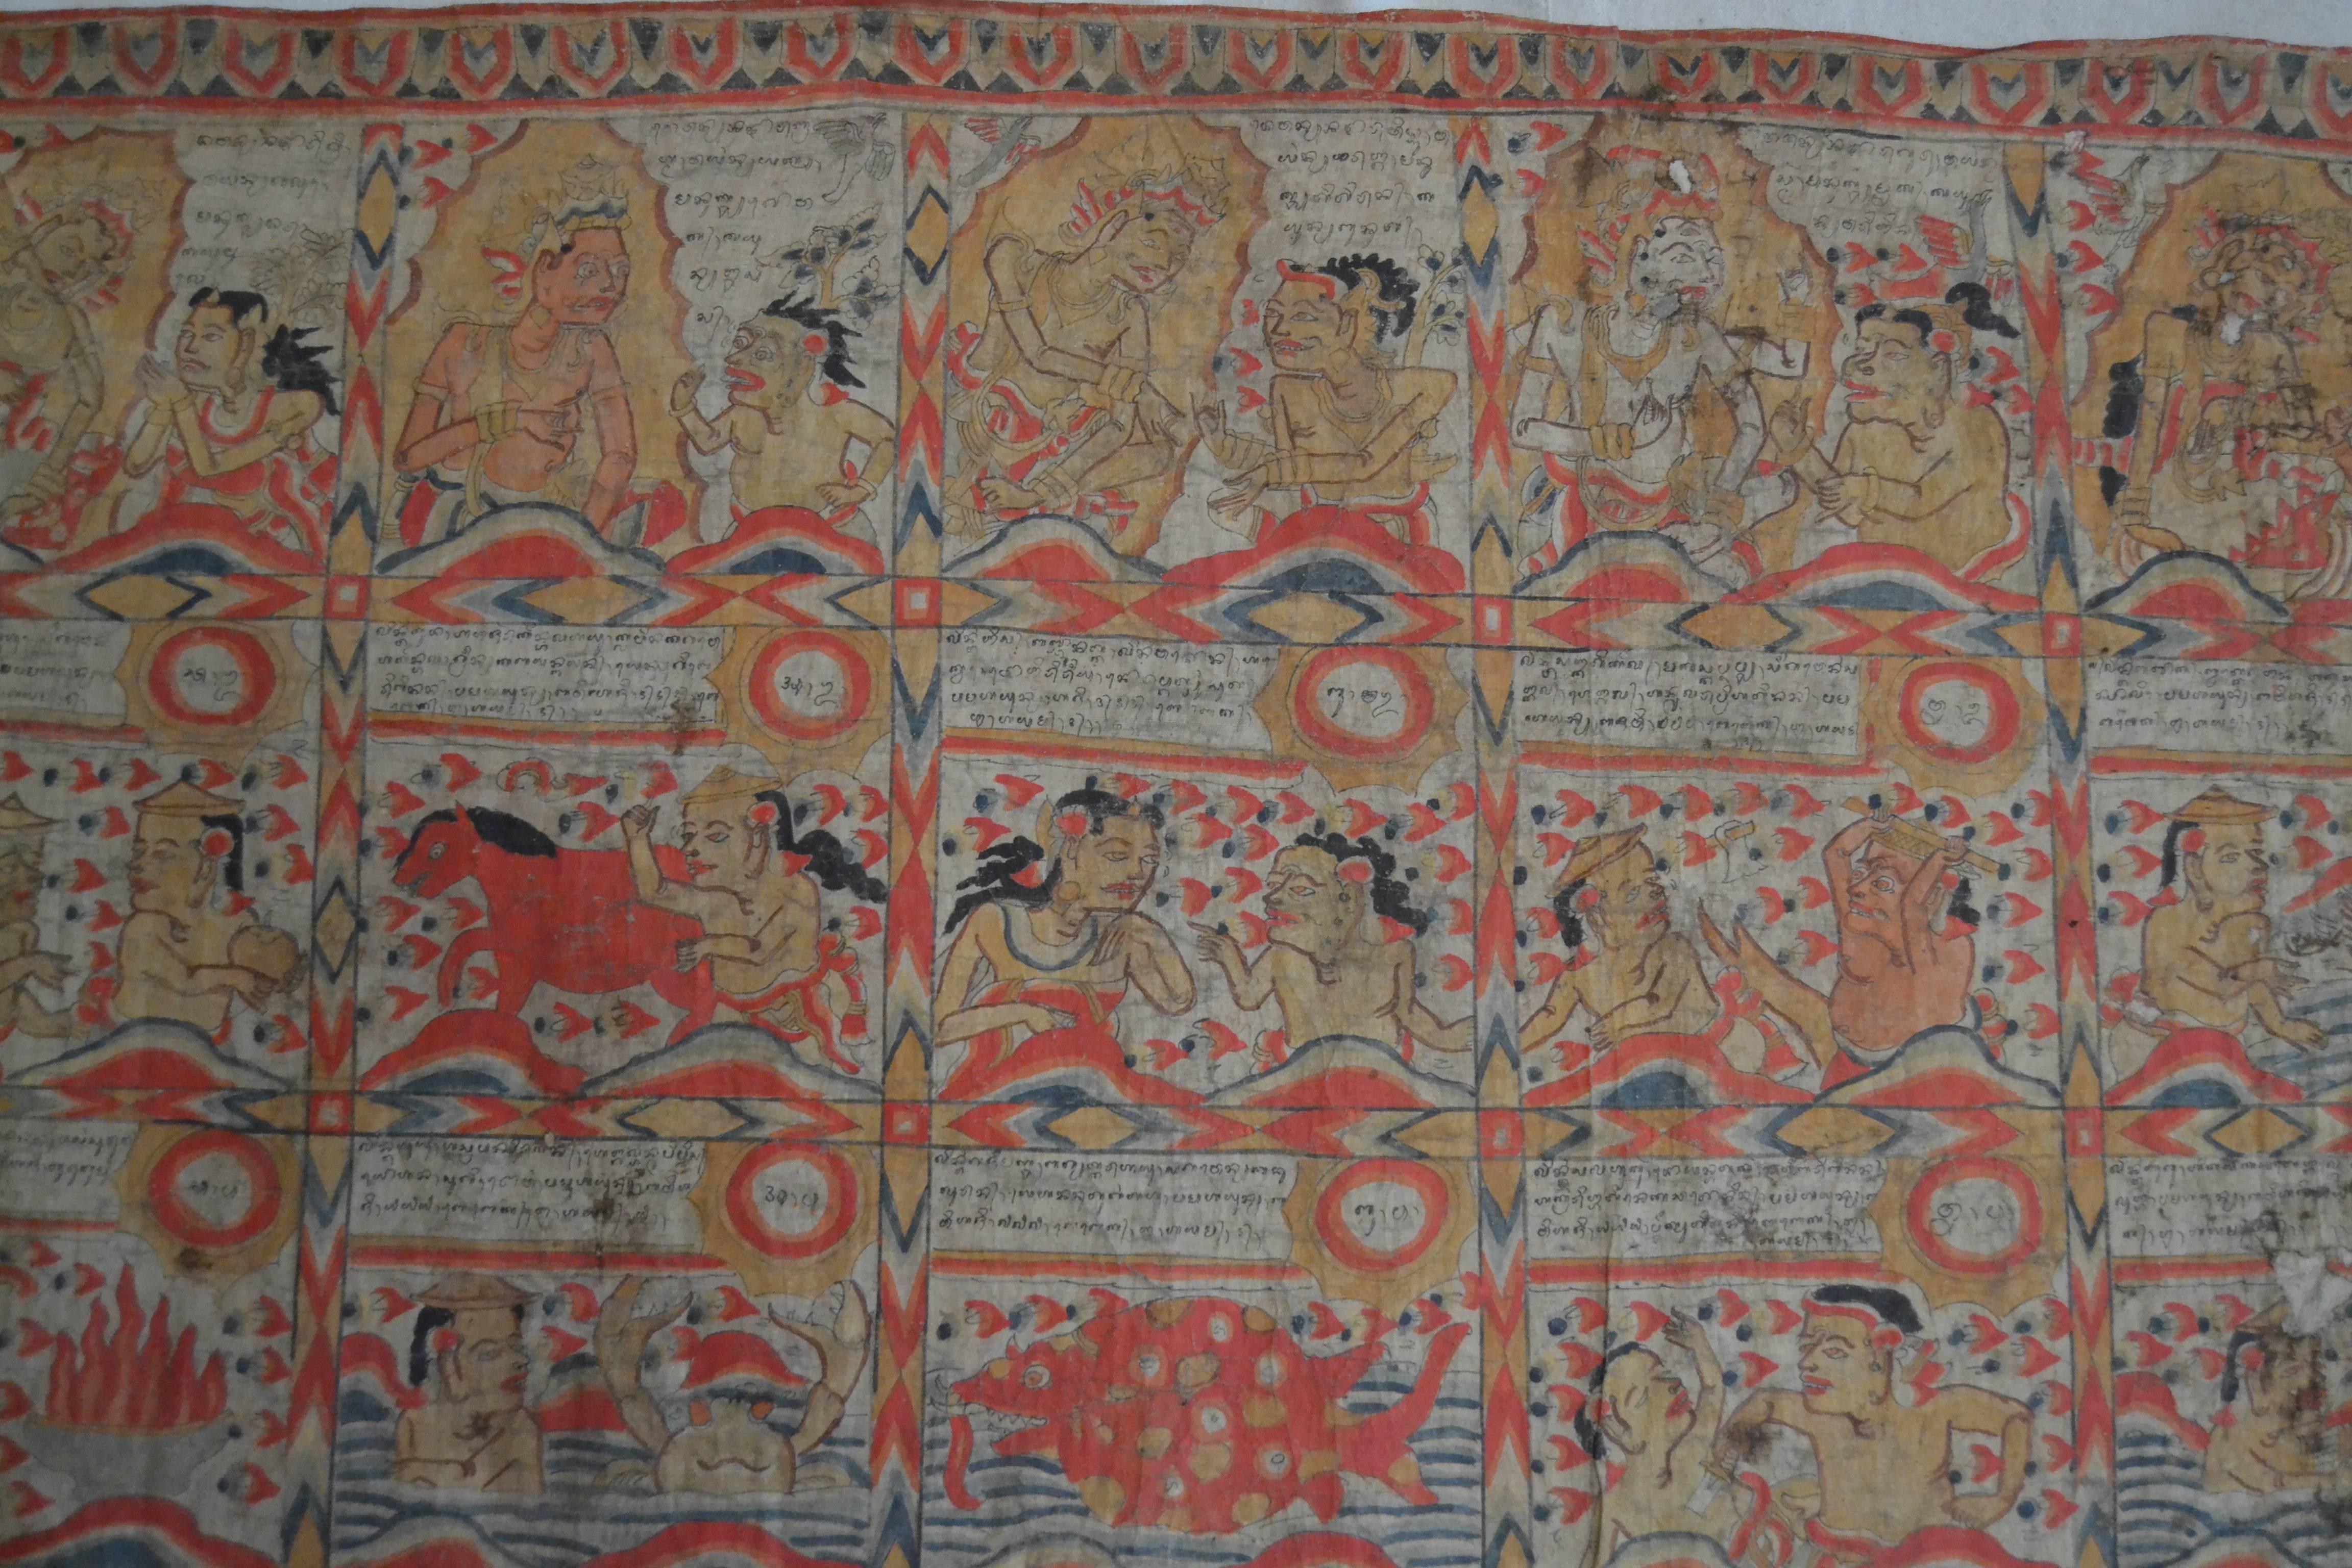 Painted calendar known as a palelintangan, shows a balinese month with the astrological, gods, and other forms that govern each day, water based pigment on cloth.